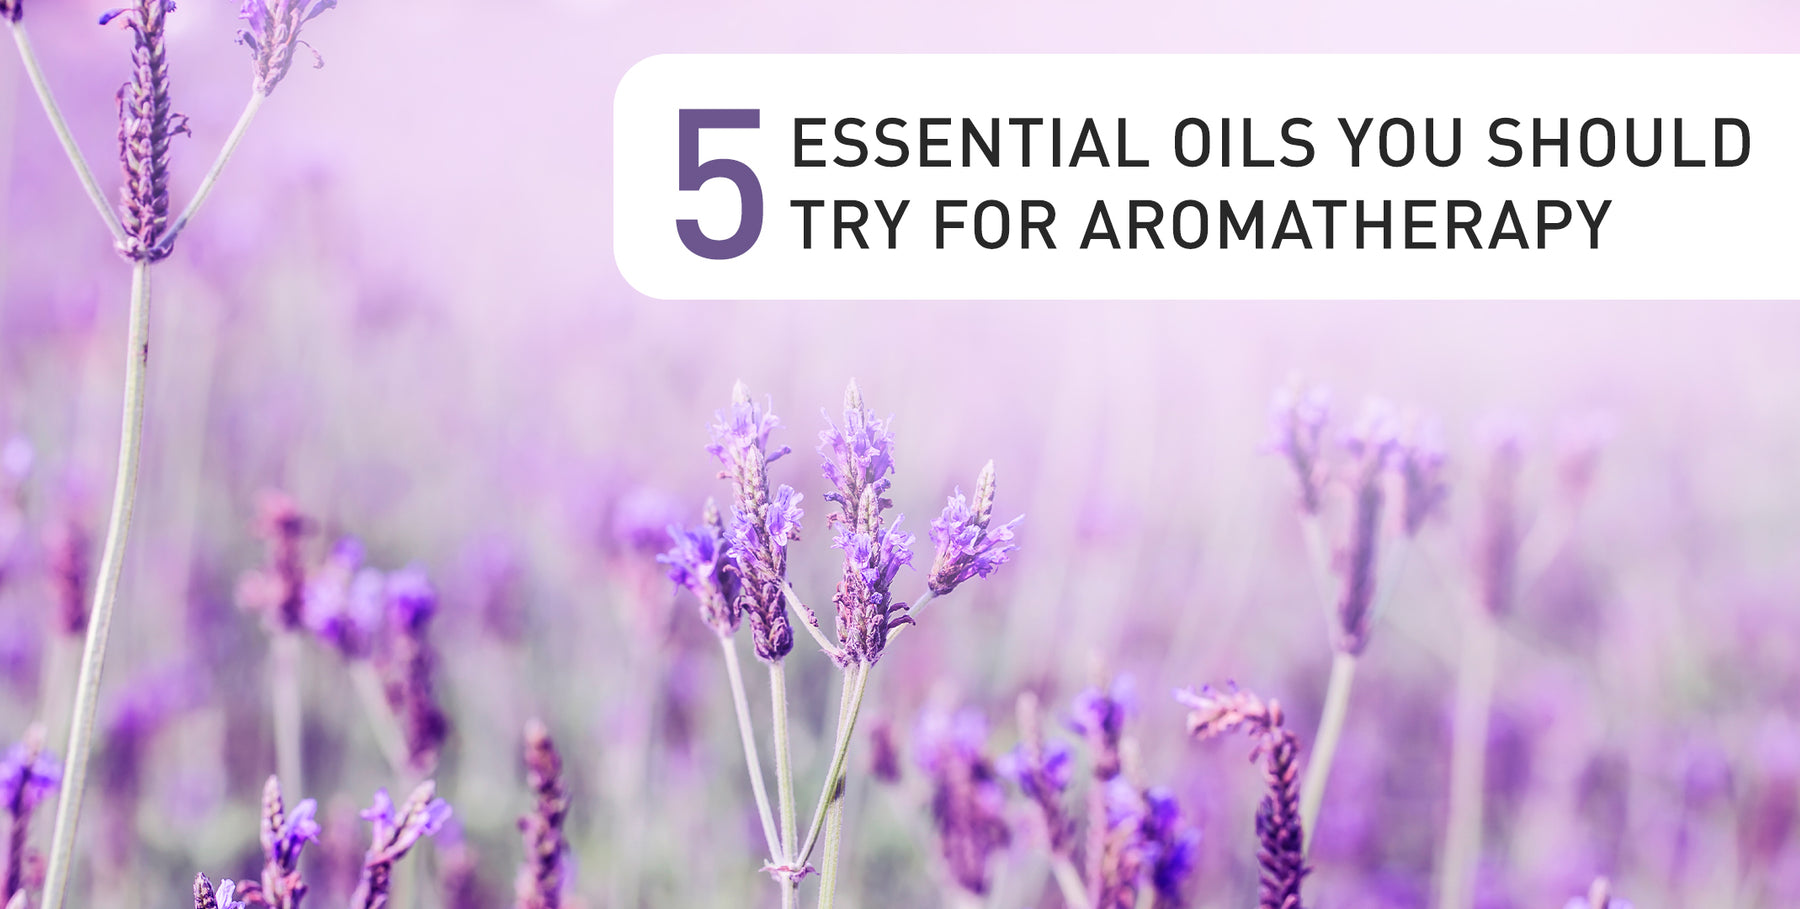 5 Essential Oils that you should try for Aromatherapy